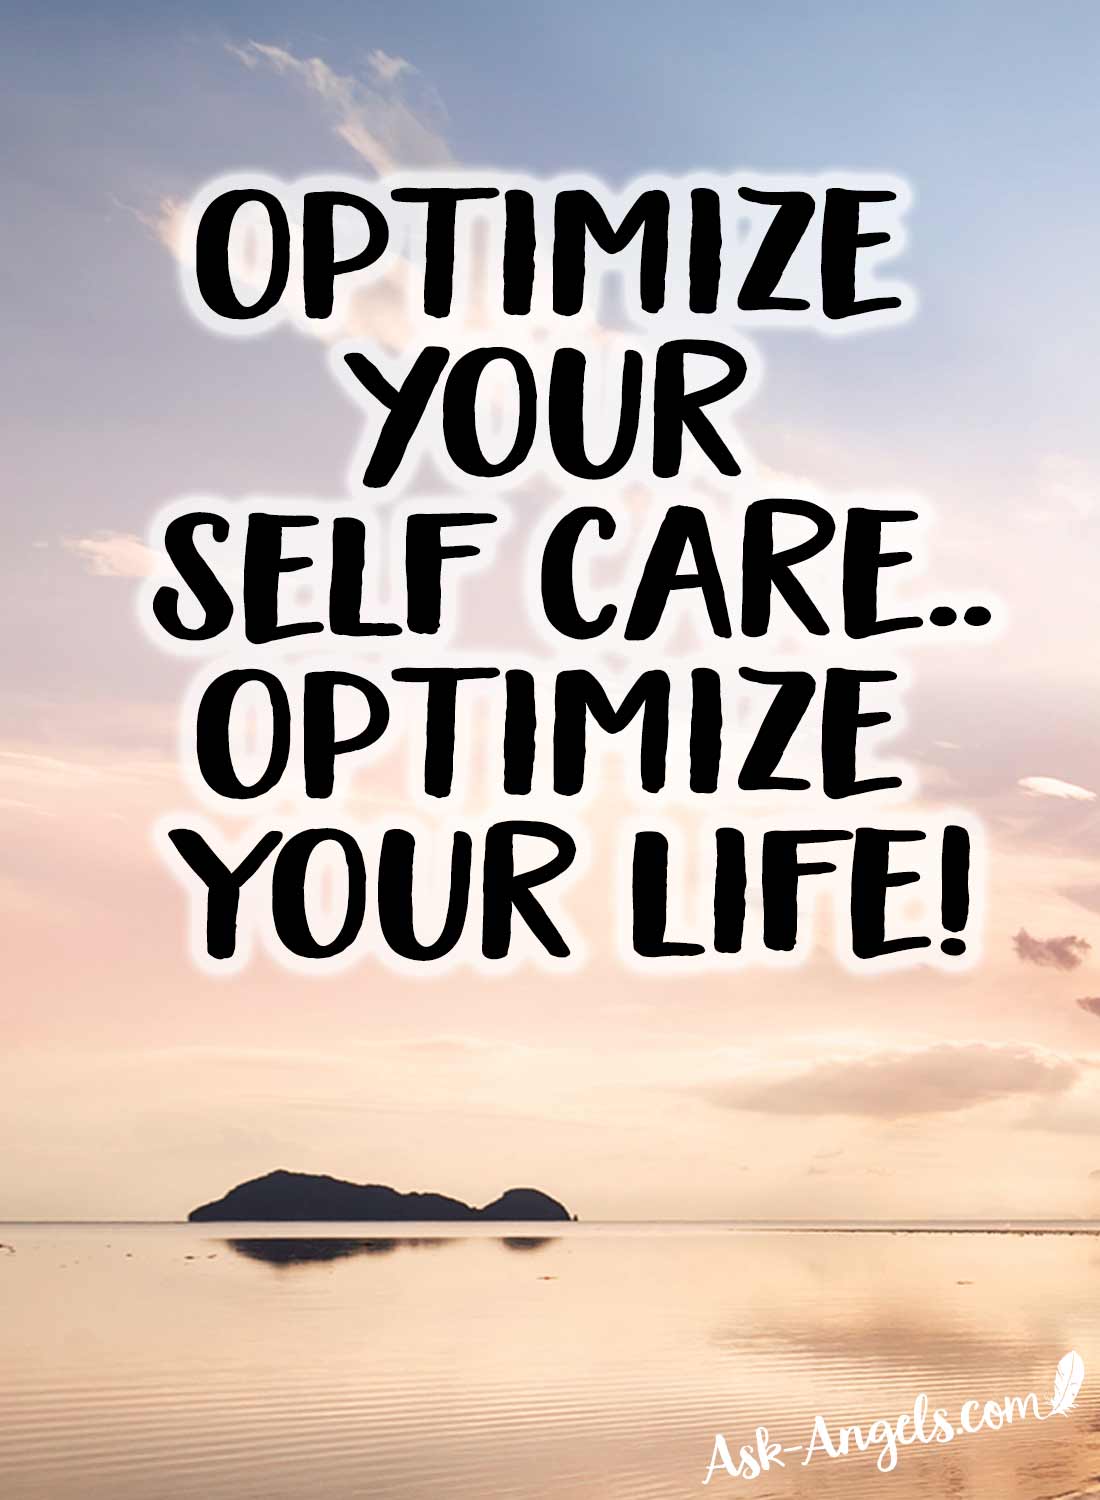 Optimize your self care... Optimize your life!